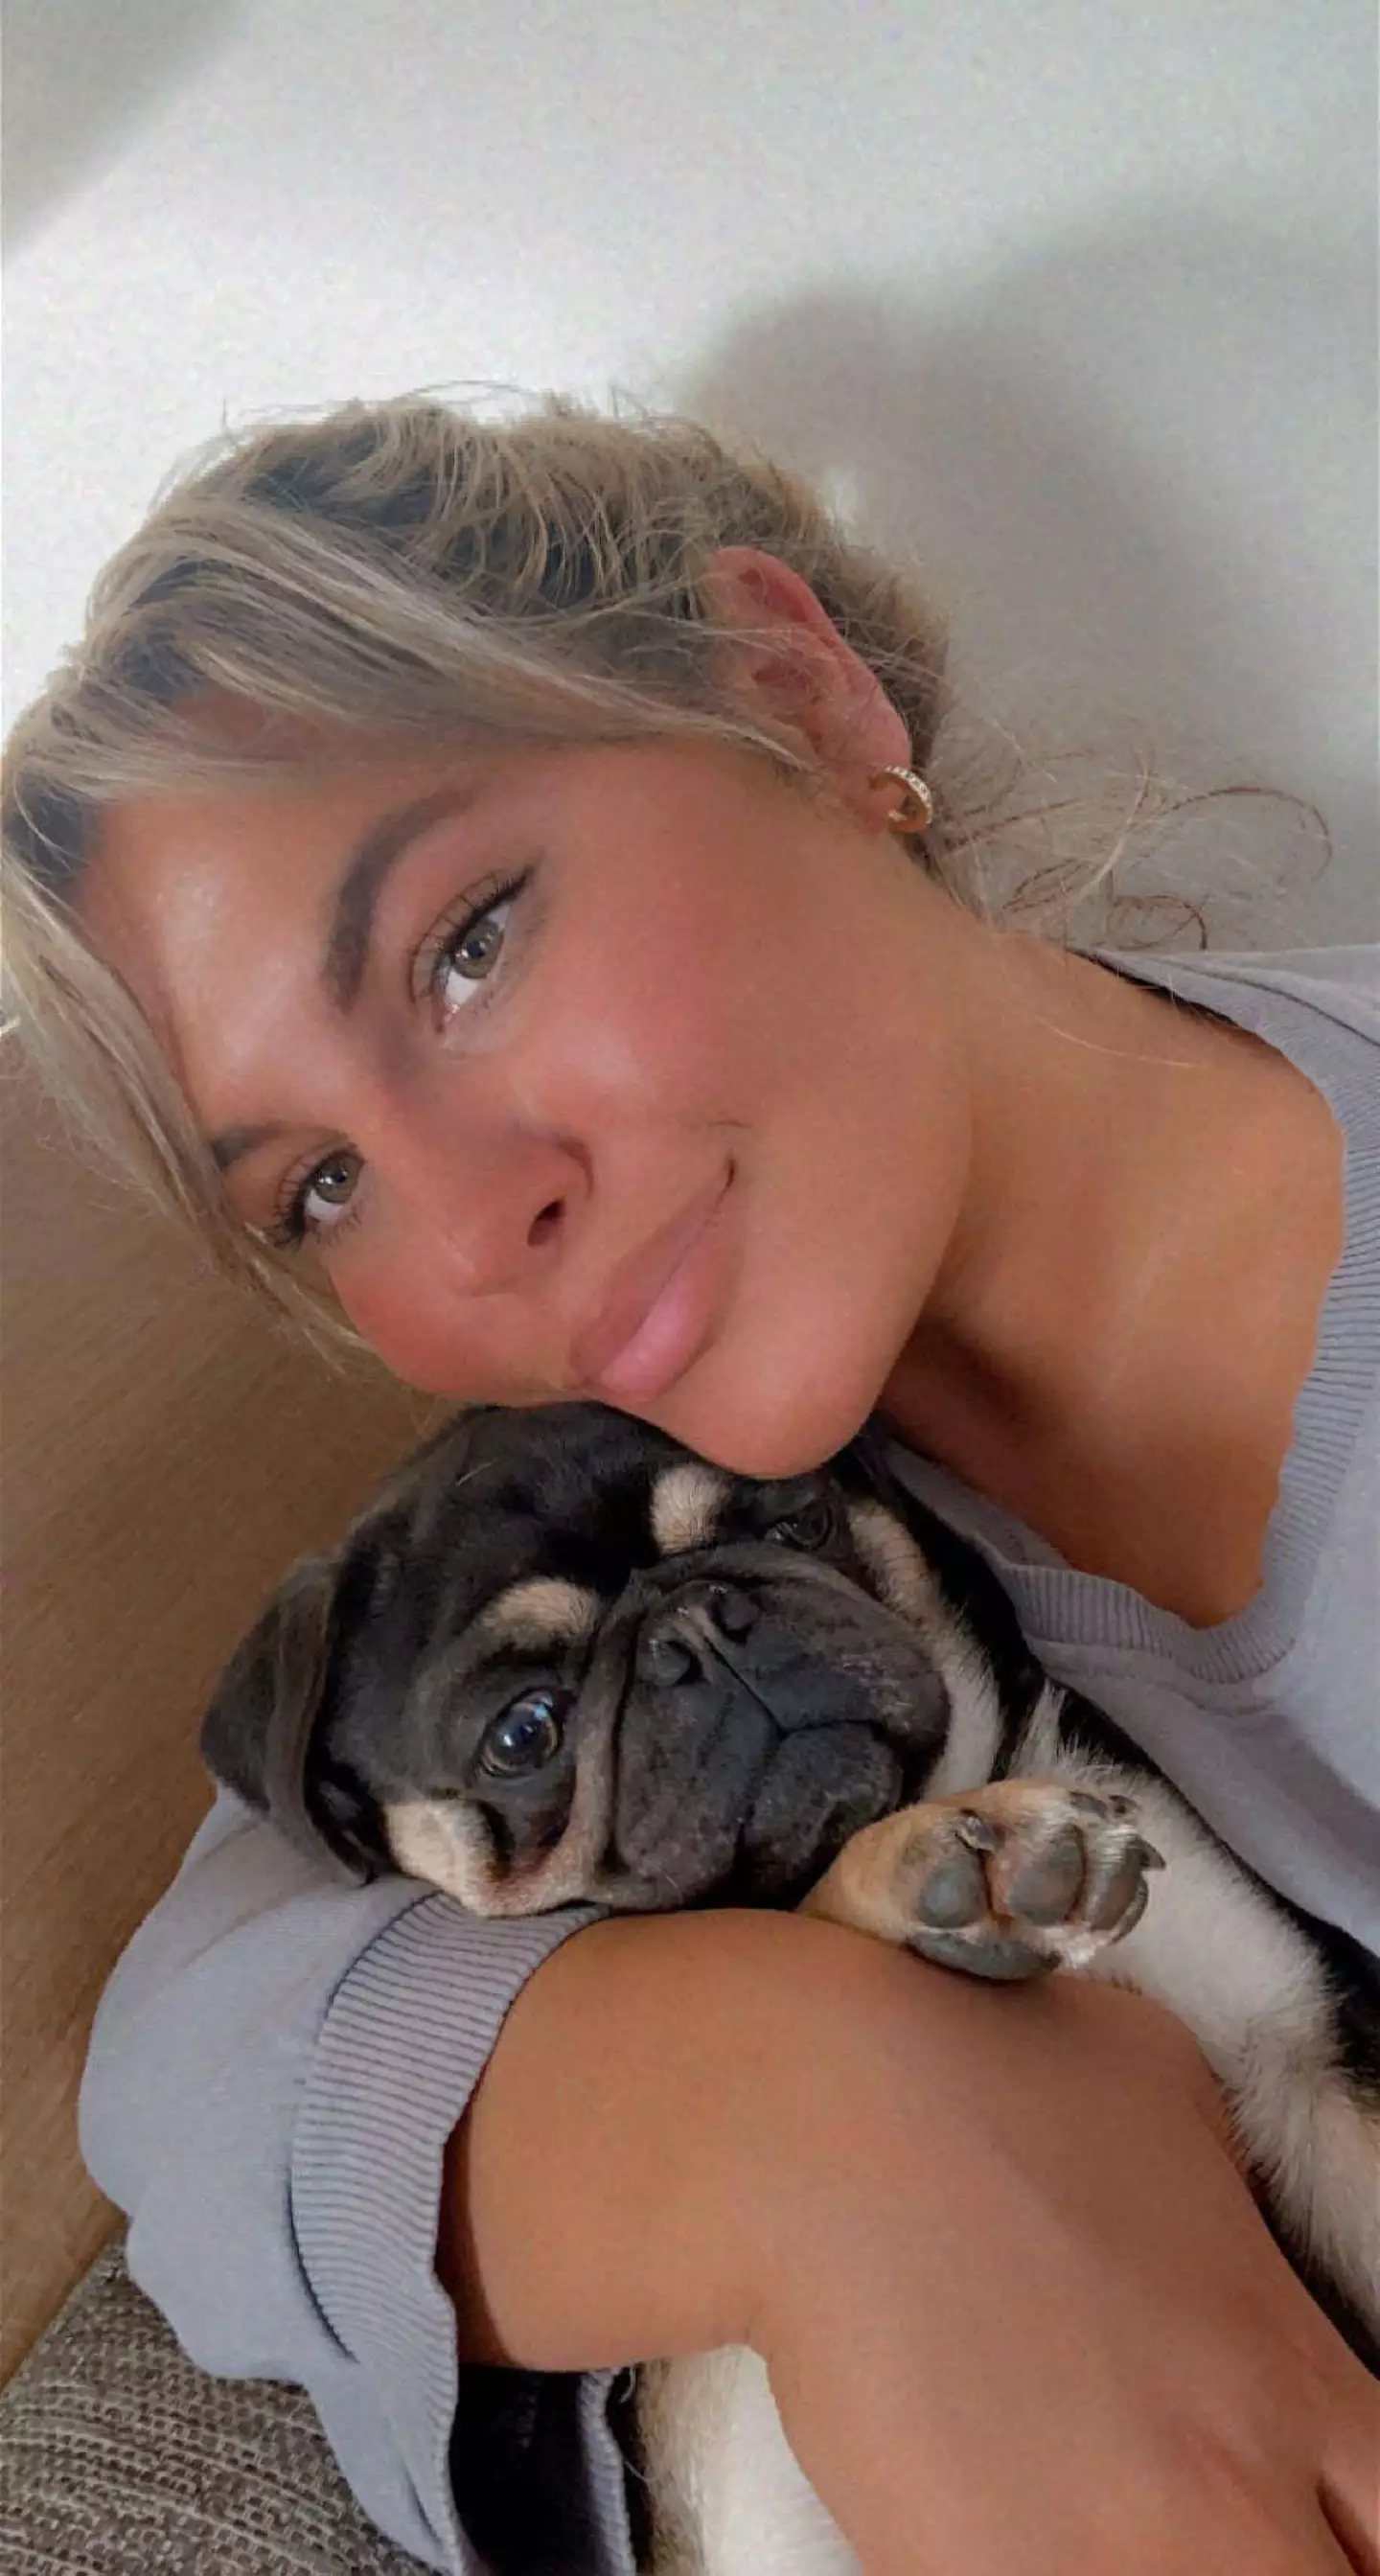 Robyn's pug has heard on the recording in addition to the unknown man's voice. (